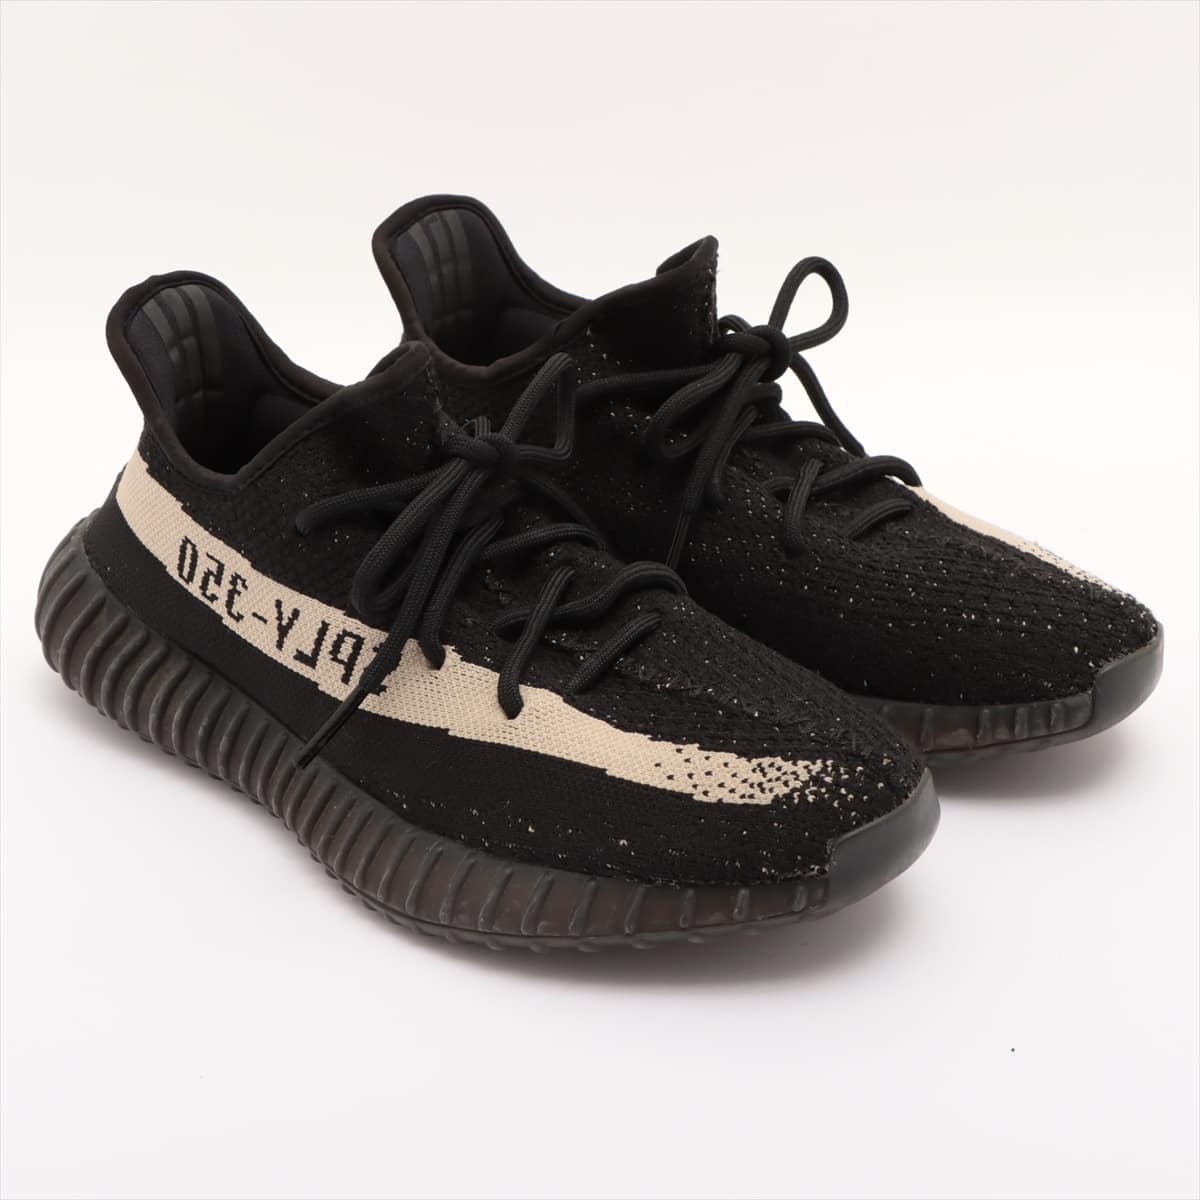 Adidas YEEZY BOOST 350 V2 Knit Sneakers 26.5㎝ Men's Black OREO BY1604